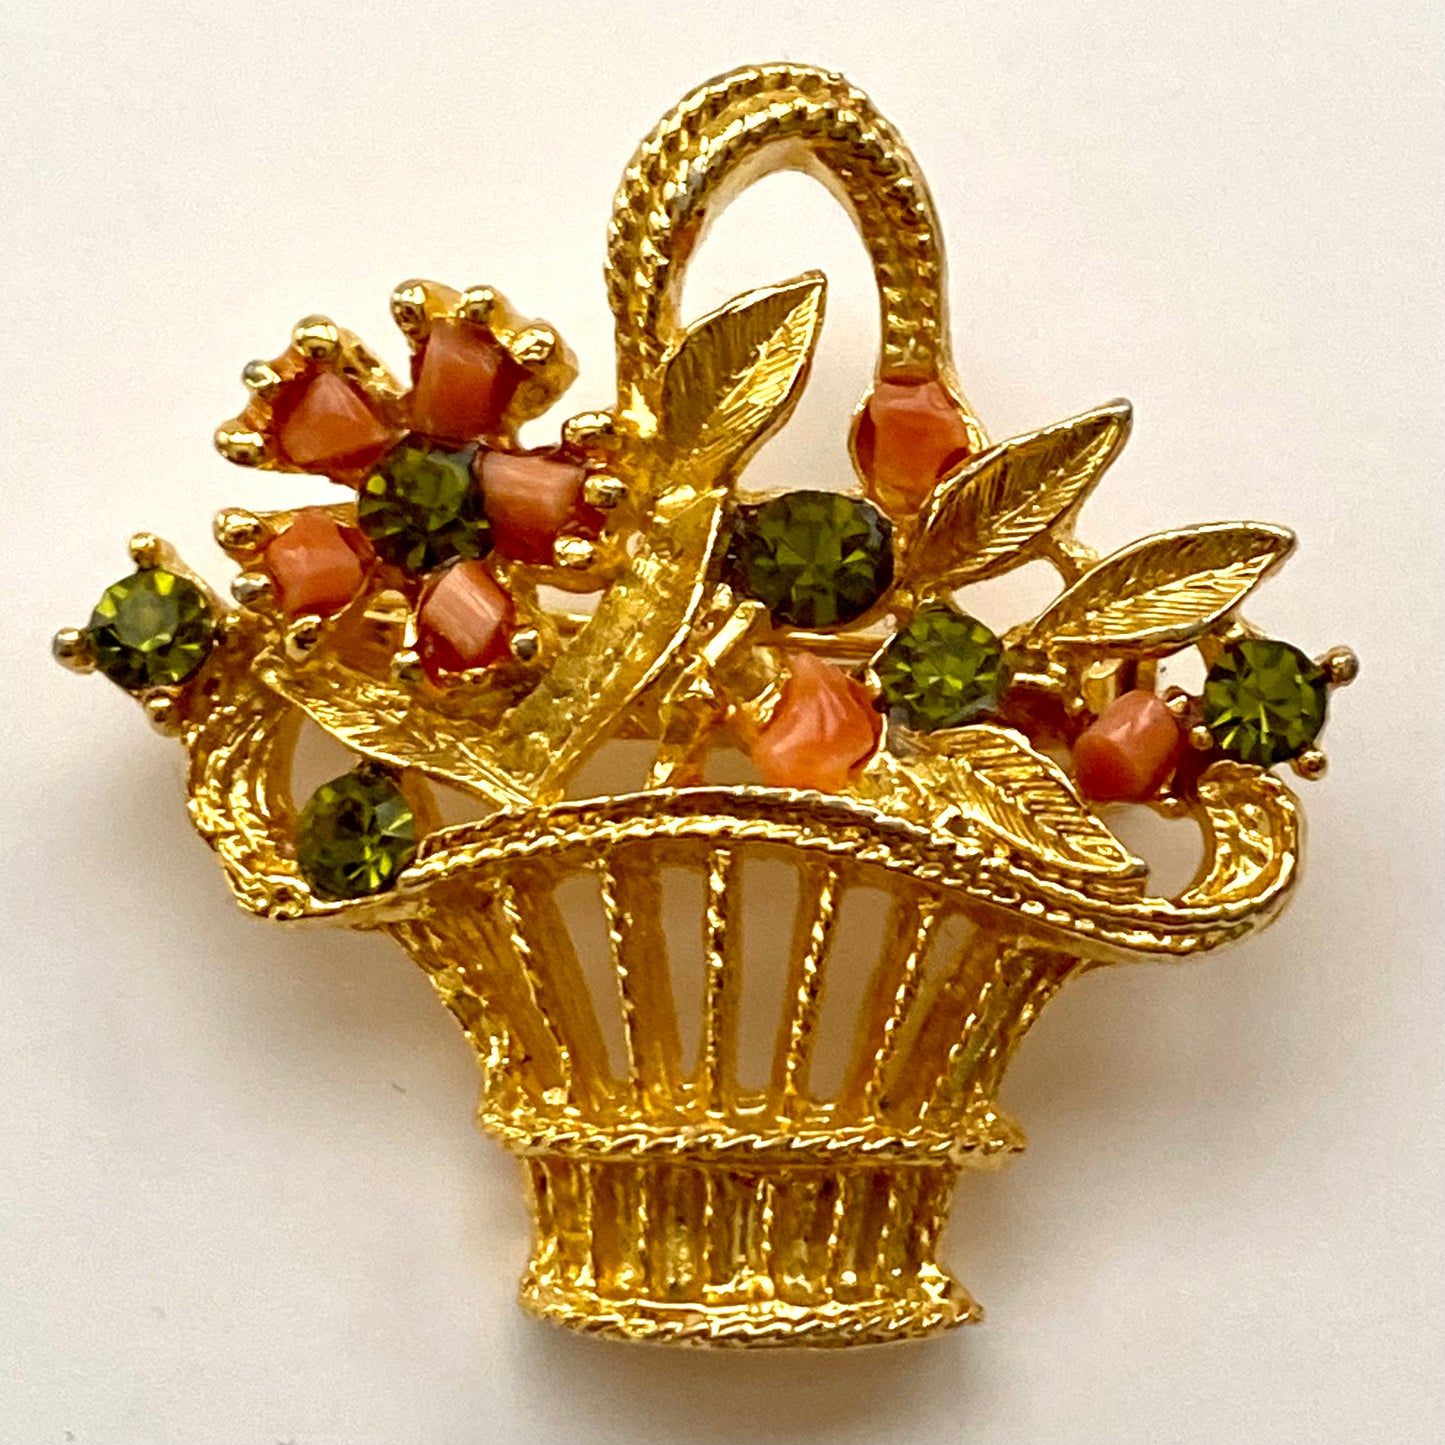 Late 70s/ Early 80s Floral Basket Brooch